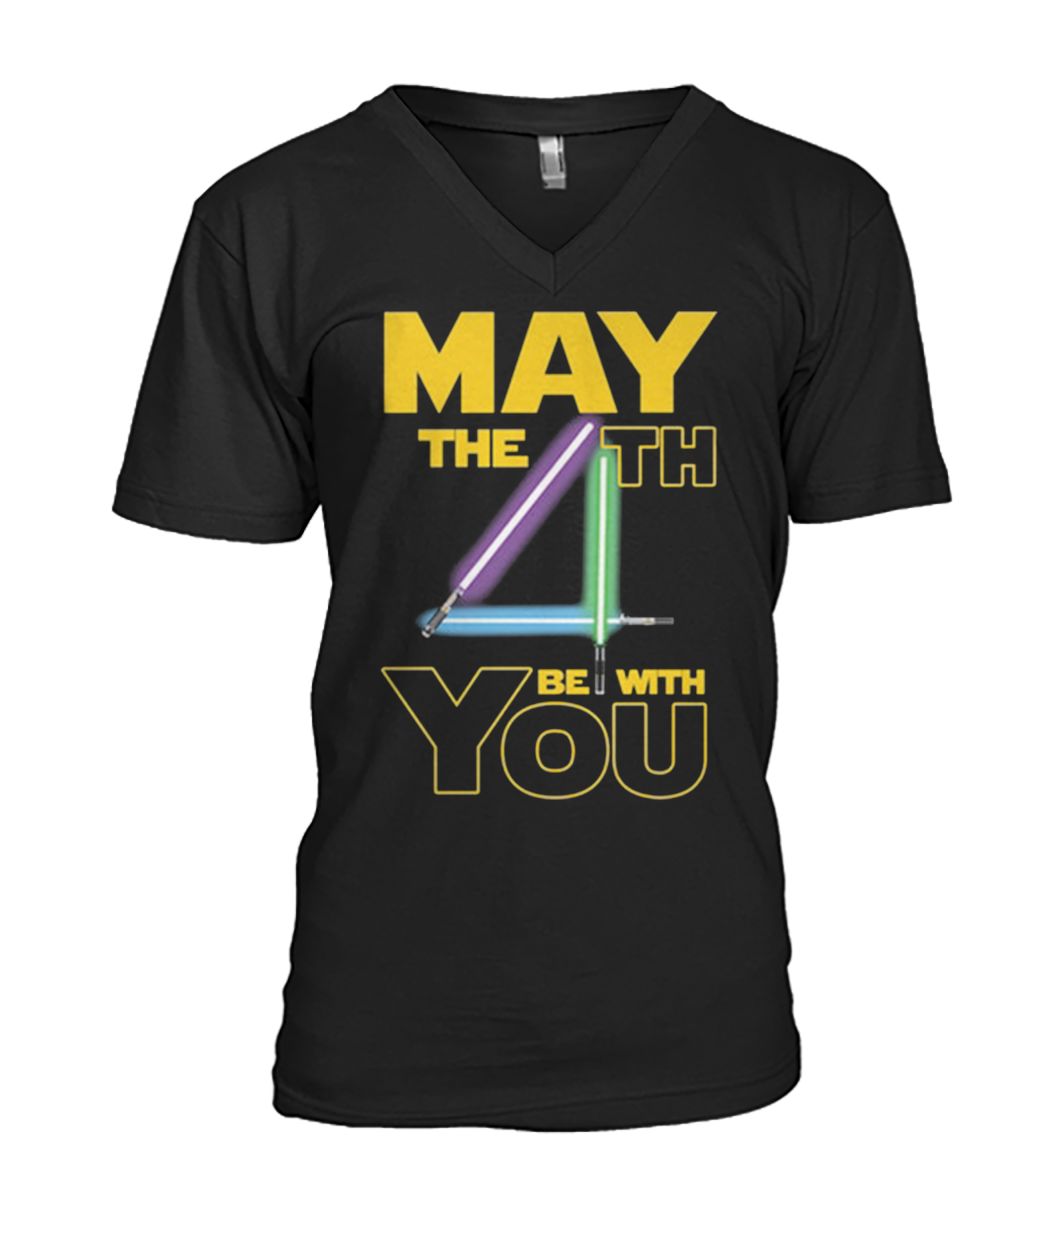 Star wars may the 4th be with you mens v-neck